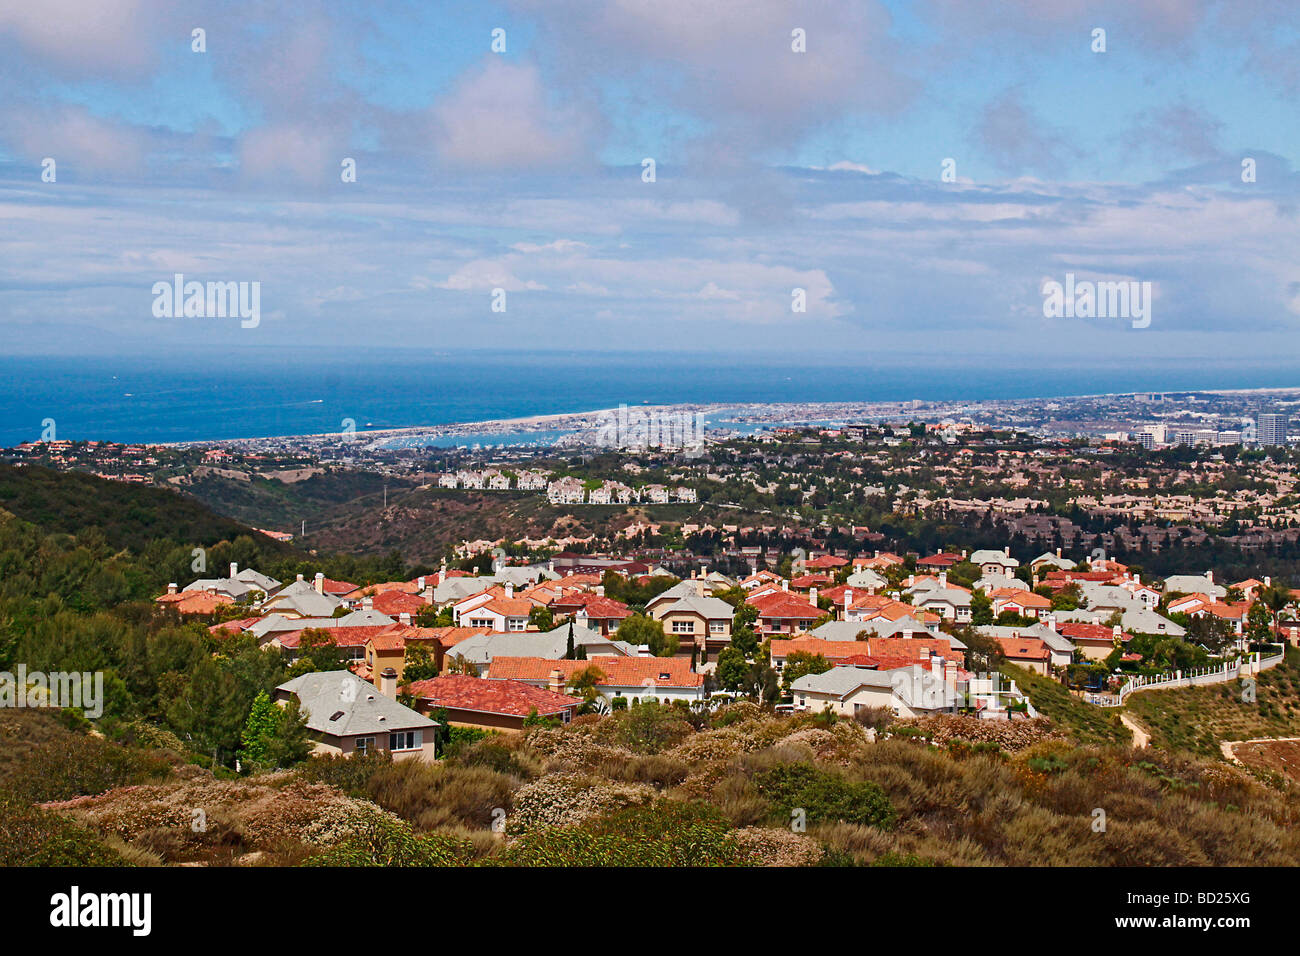 view of New Port Beach from Park ridge with upscale communities in the foreground. Stock Photo